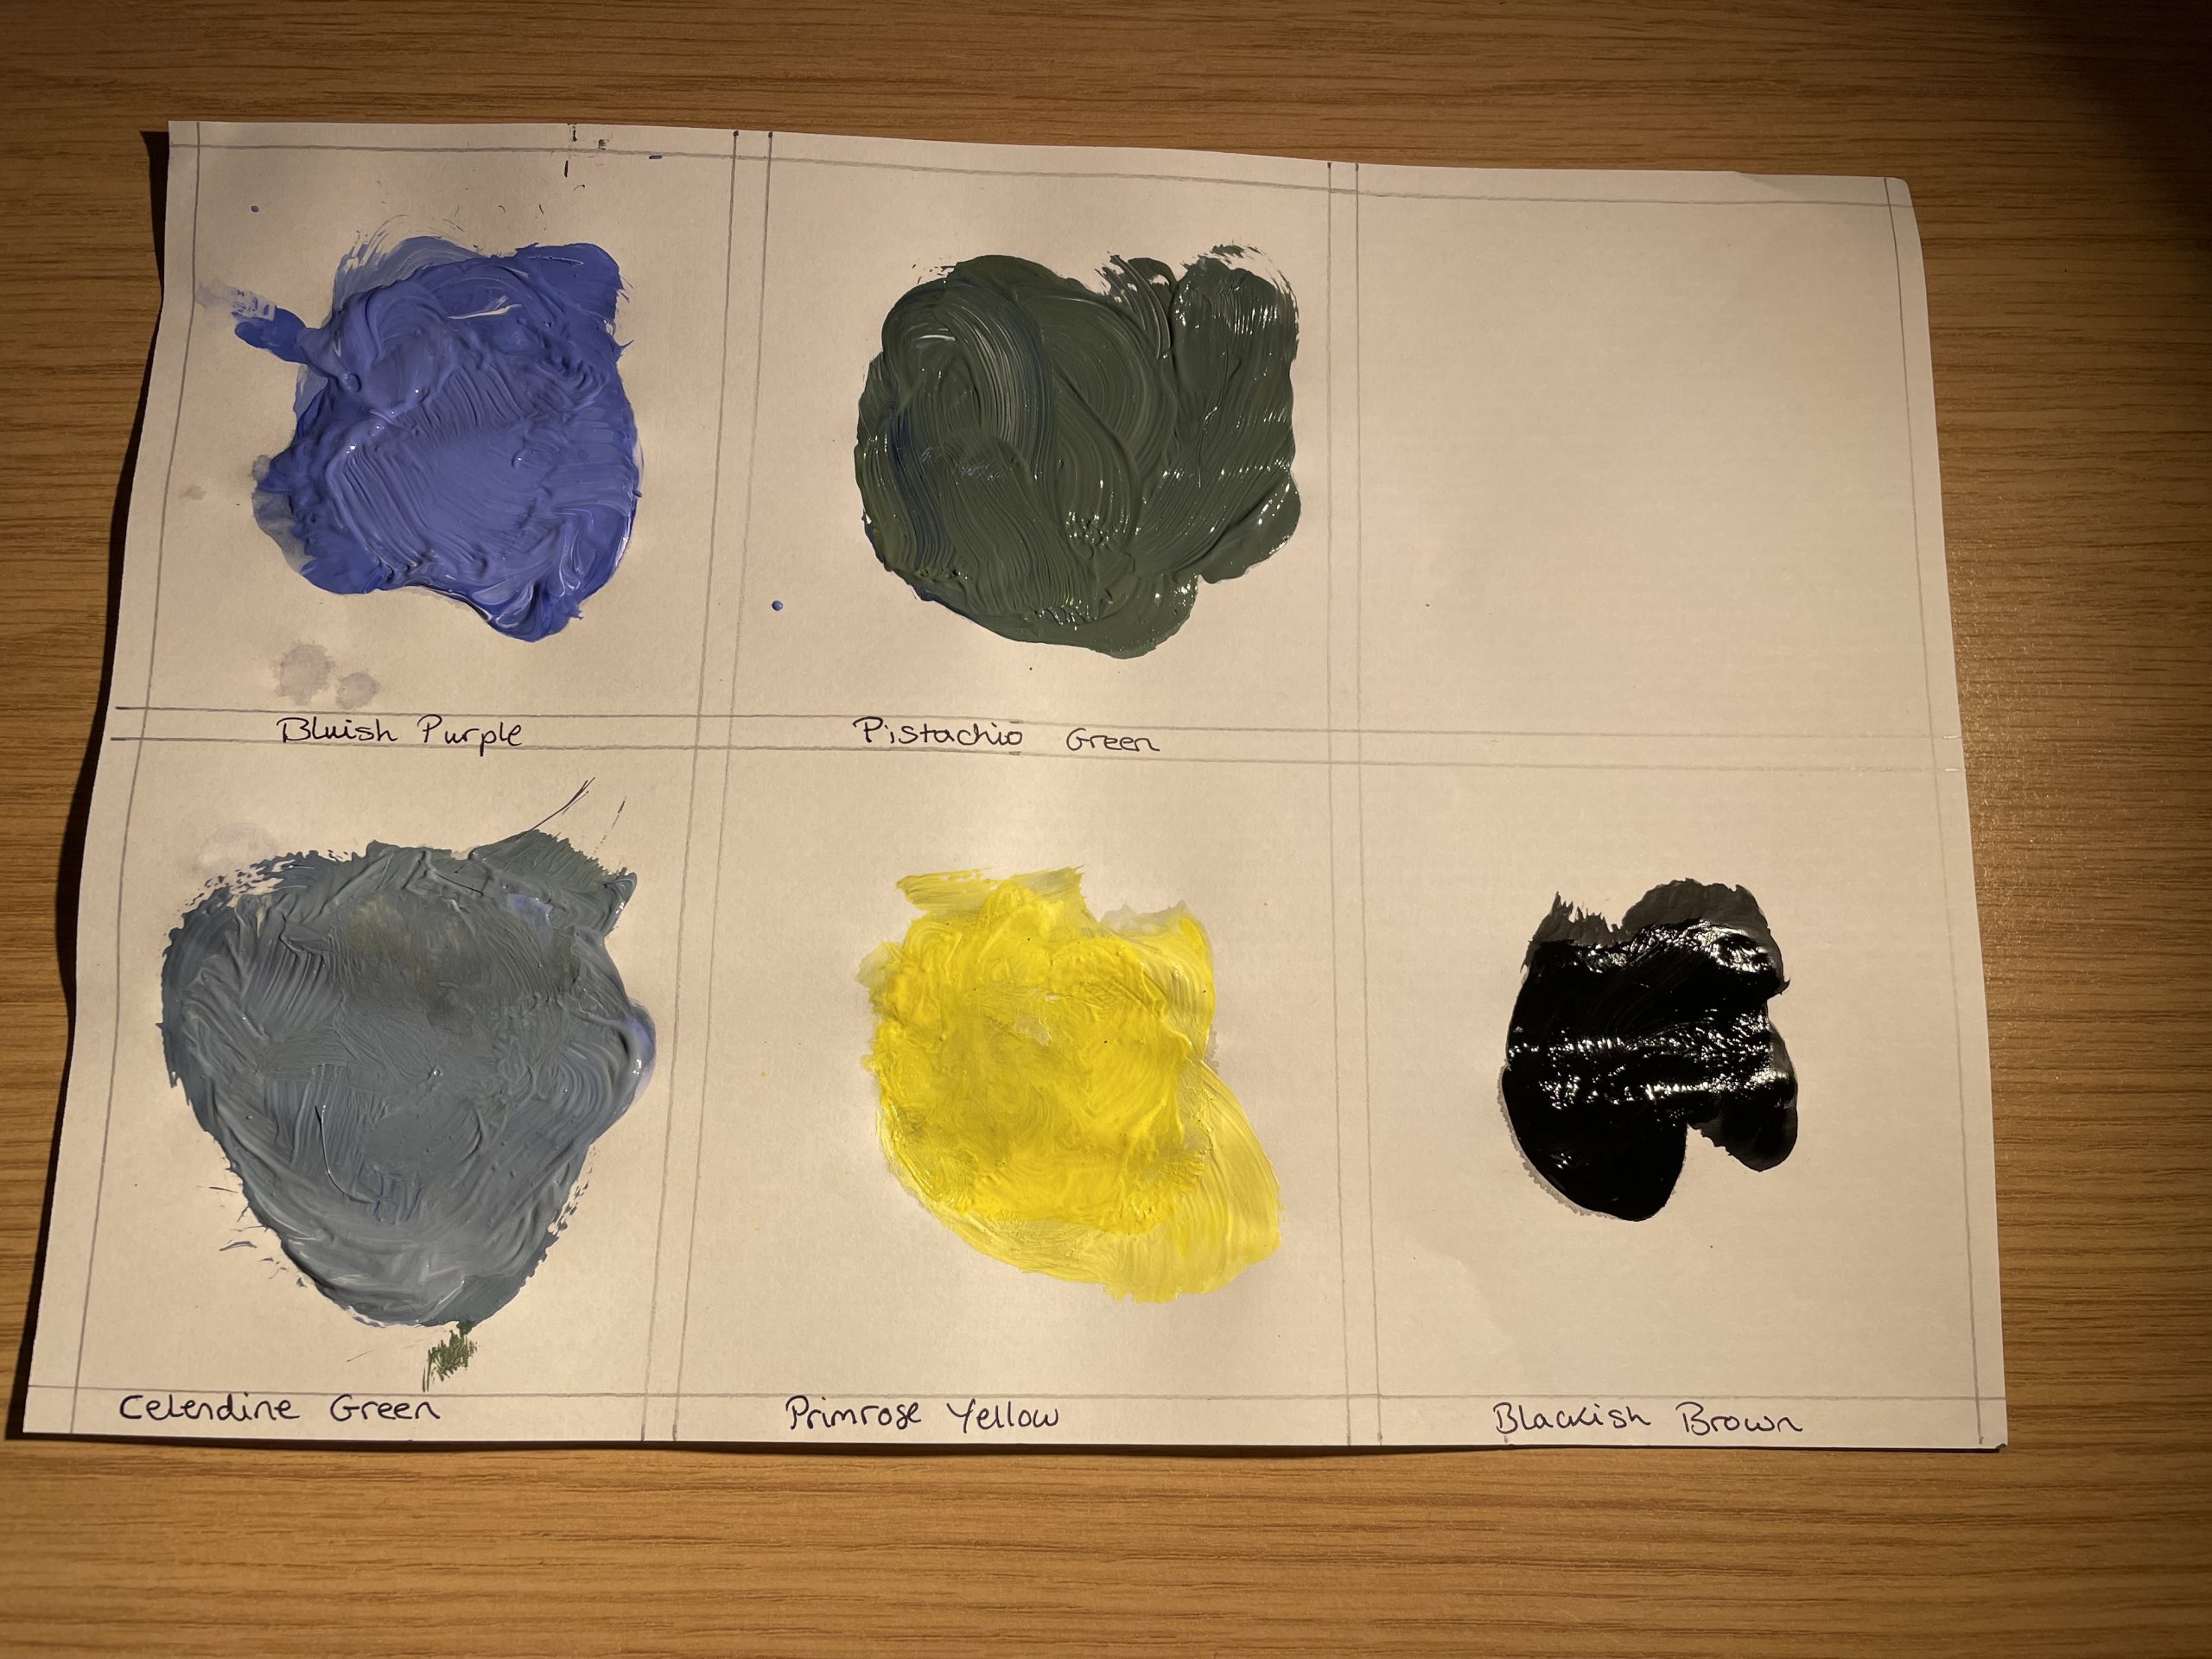 A piece of paper with five colours of paint, each in a separate section - they are labelled by colour: 'bluish purple', 'pistachio green', 'celendine green', 'primrose yellow', 'blackish brown'.